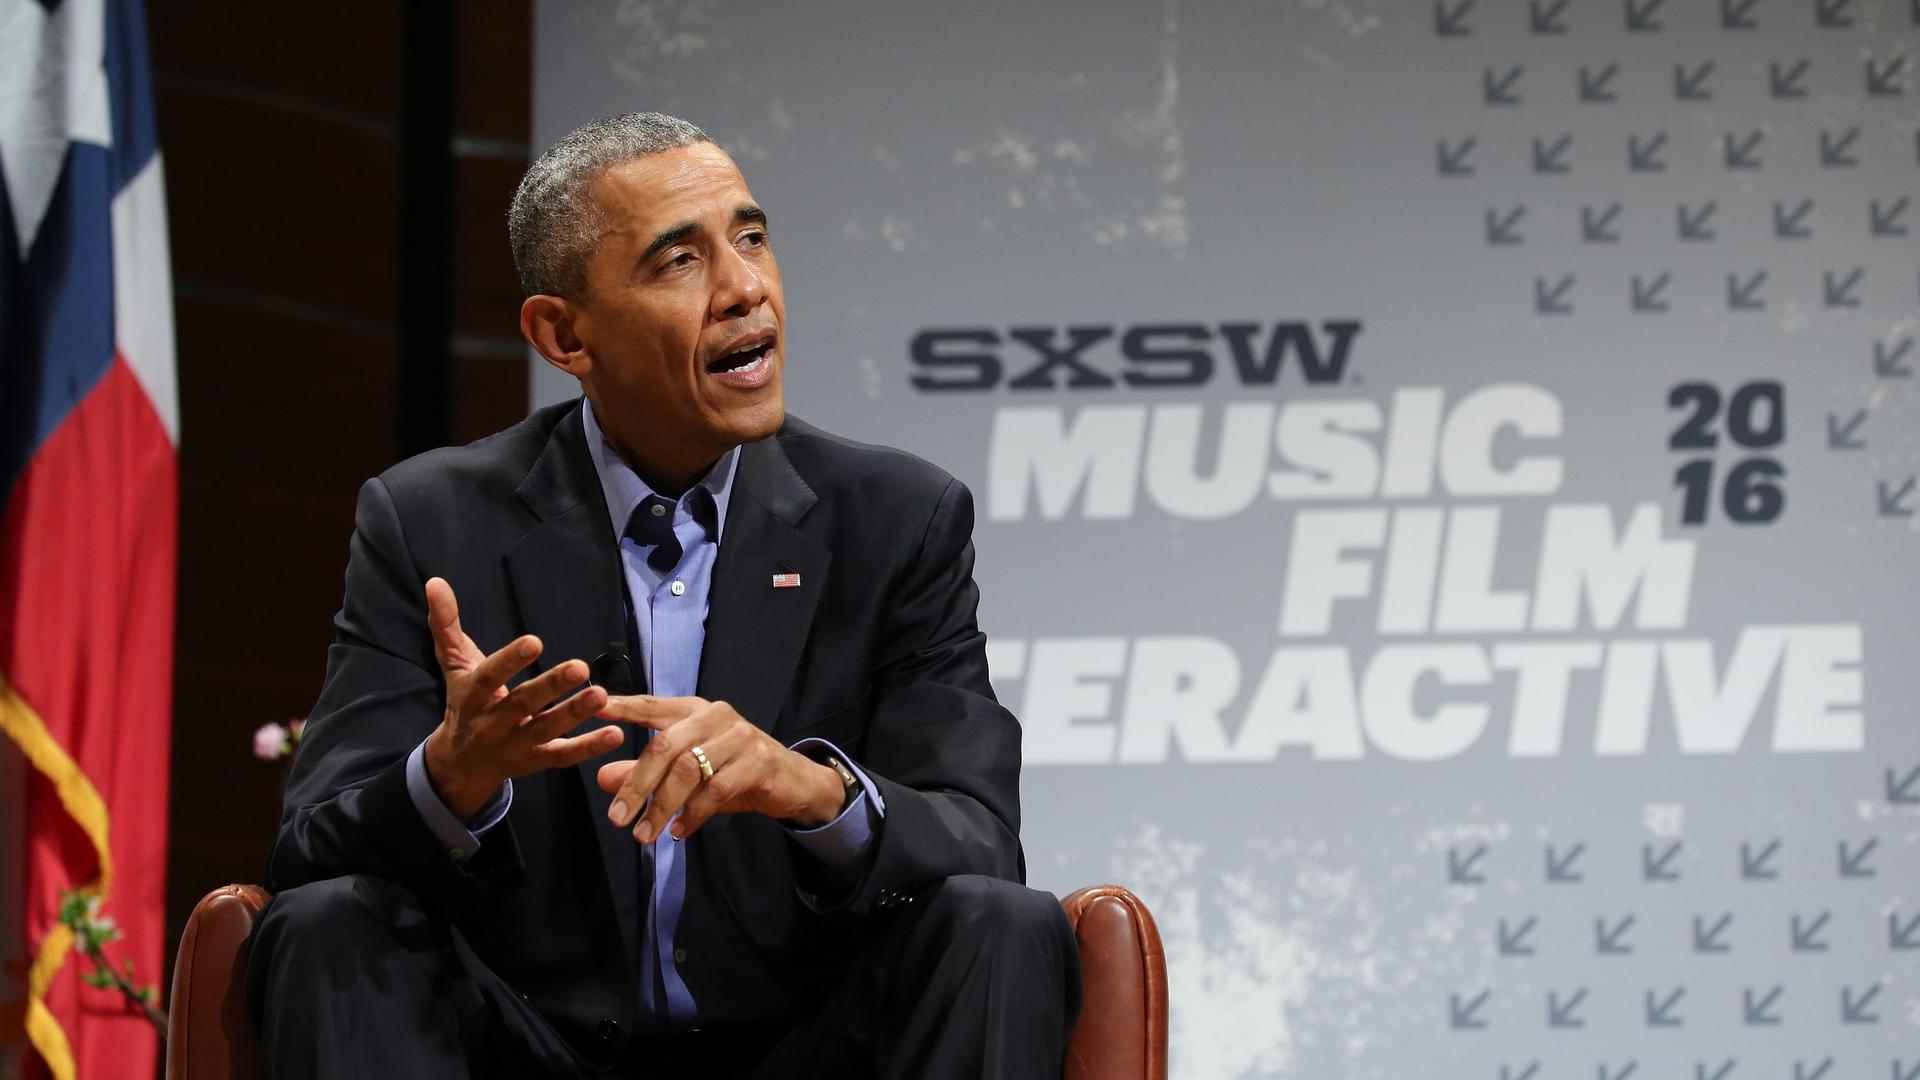  President Barack Obama speaks at the opening Keynote during the 2016 SXSW Festival in Austin, Texas.